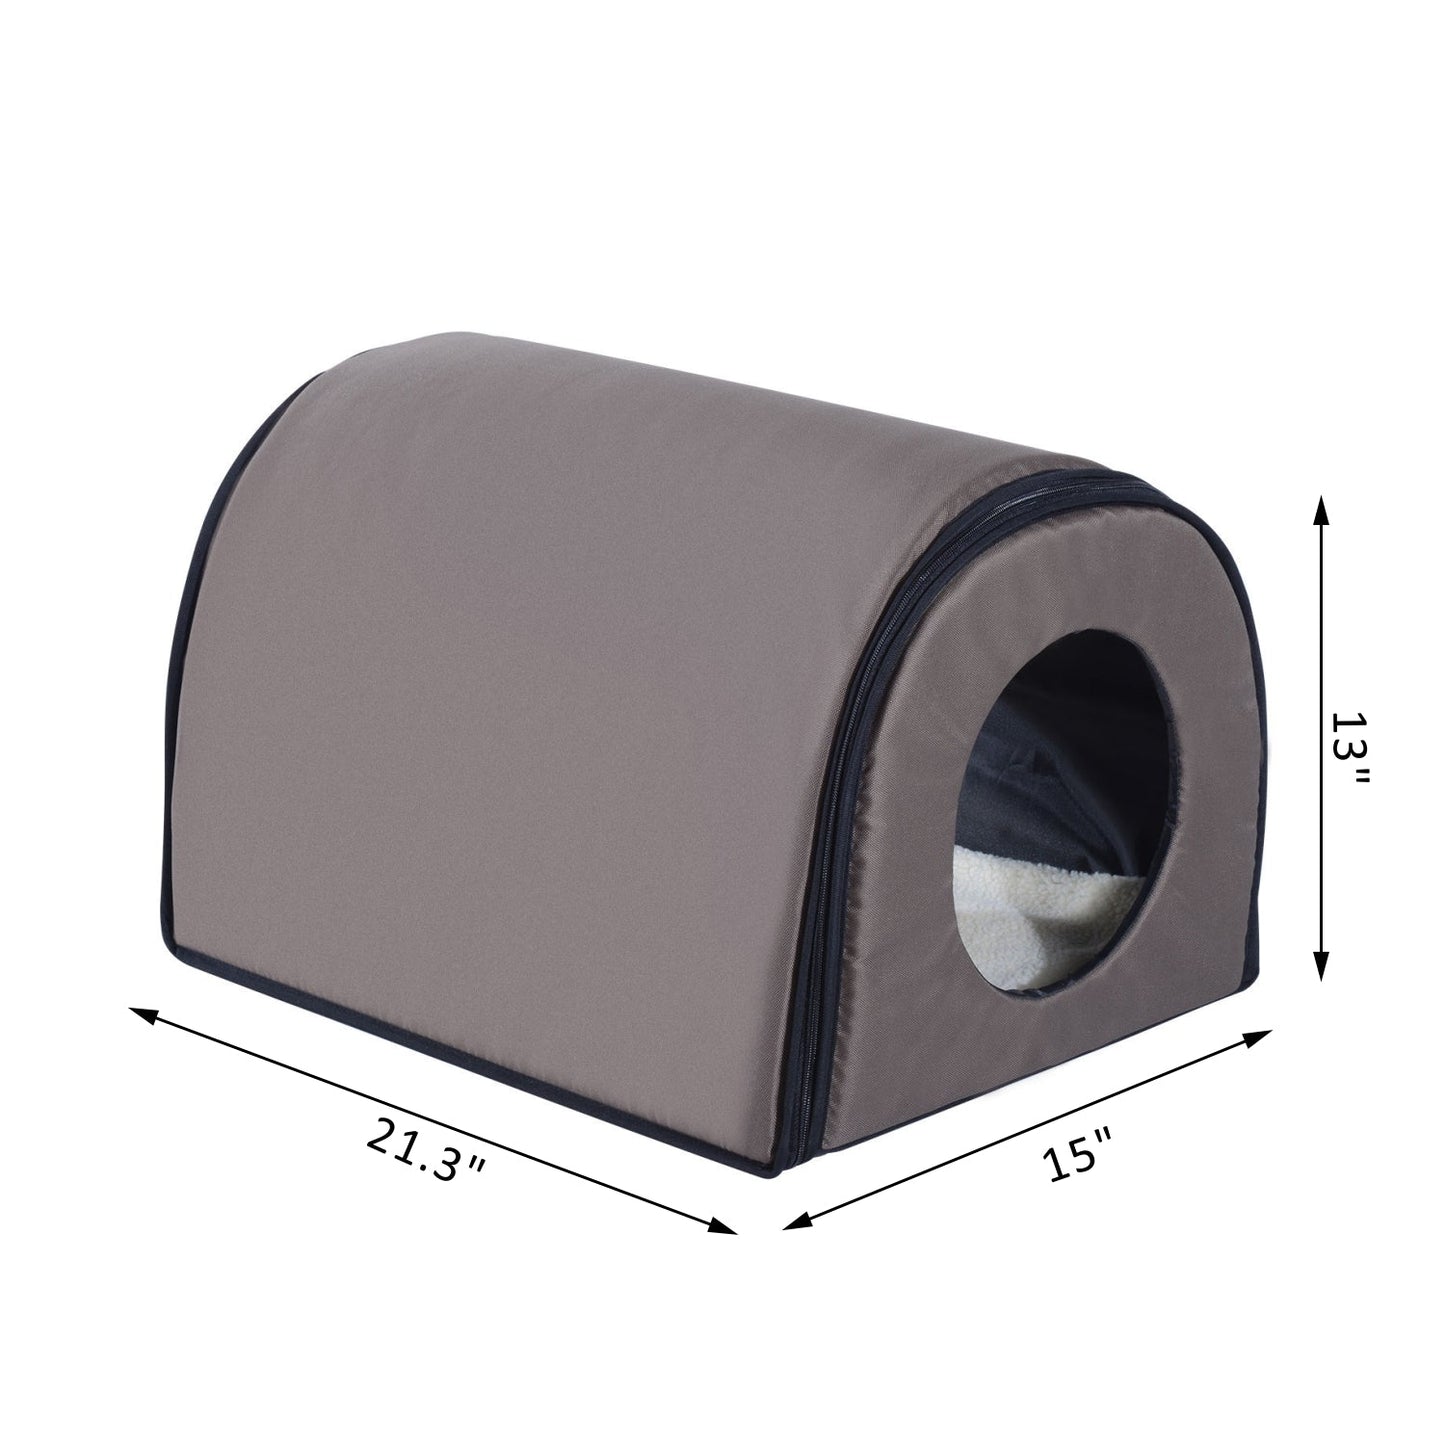 -PawHut Heated Cat House Outdoor Portable Heated Cat Houses, Elevated Waterproof and Insulated A Safe Pet House Stay Warm and Dry Brown - Outdoor Style Company